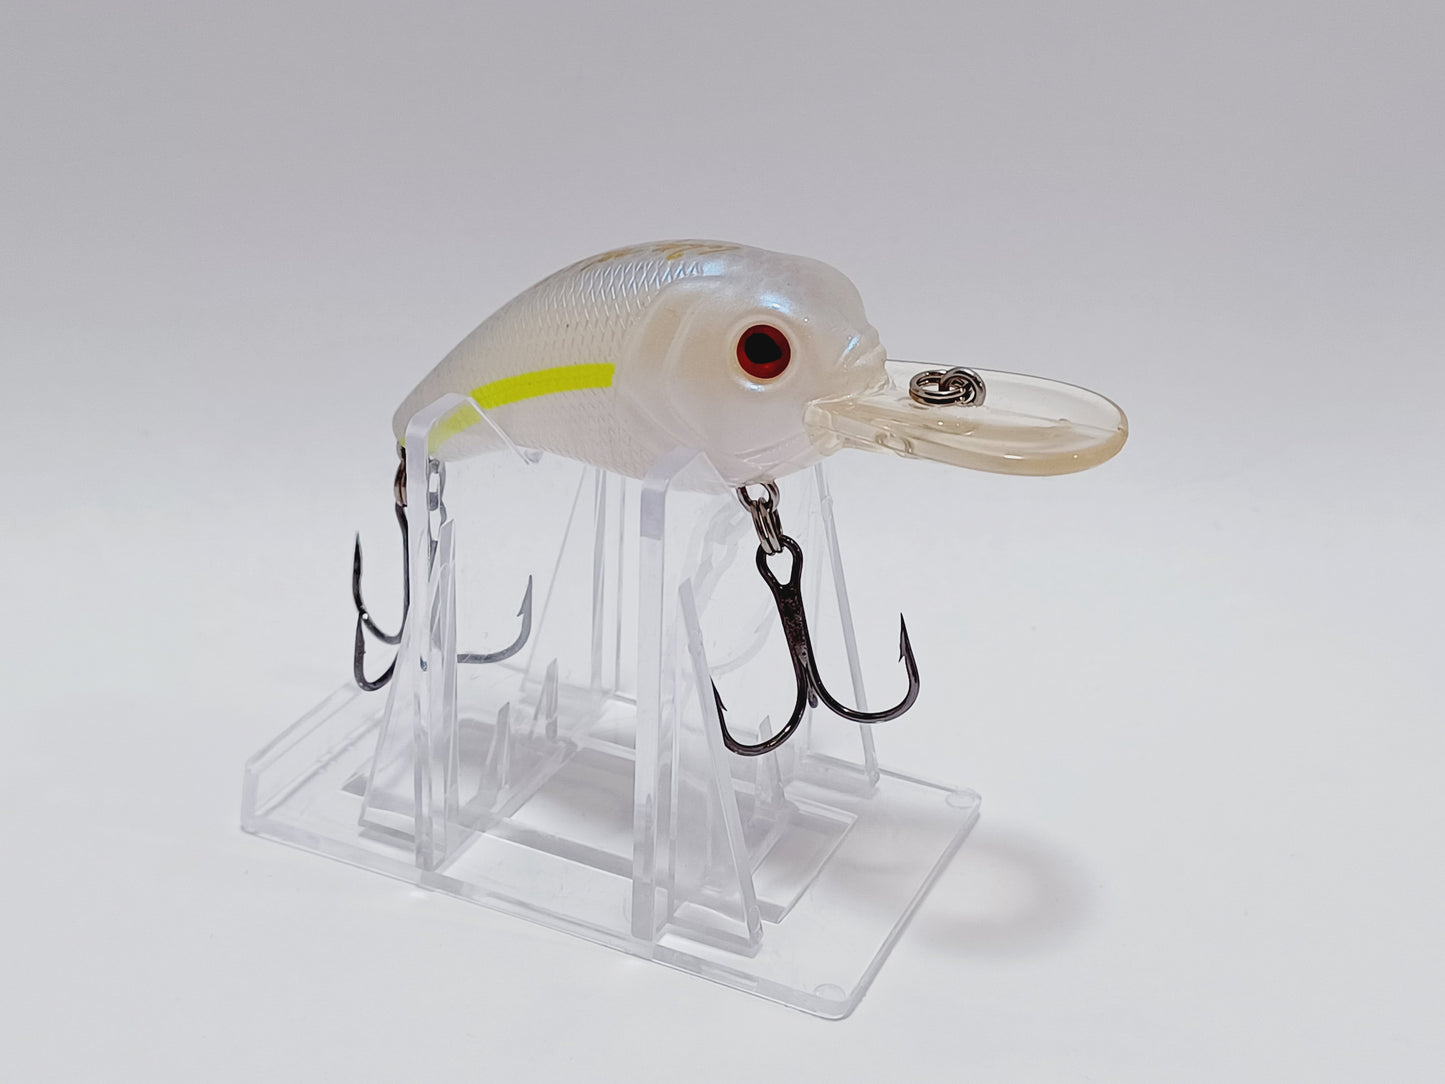 Classic Bass Pro Shop Crappie Maxx Cranks diving lure (Pearl white -chartreuse)